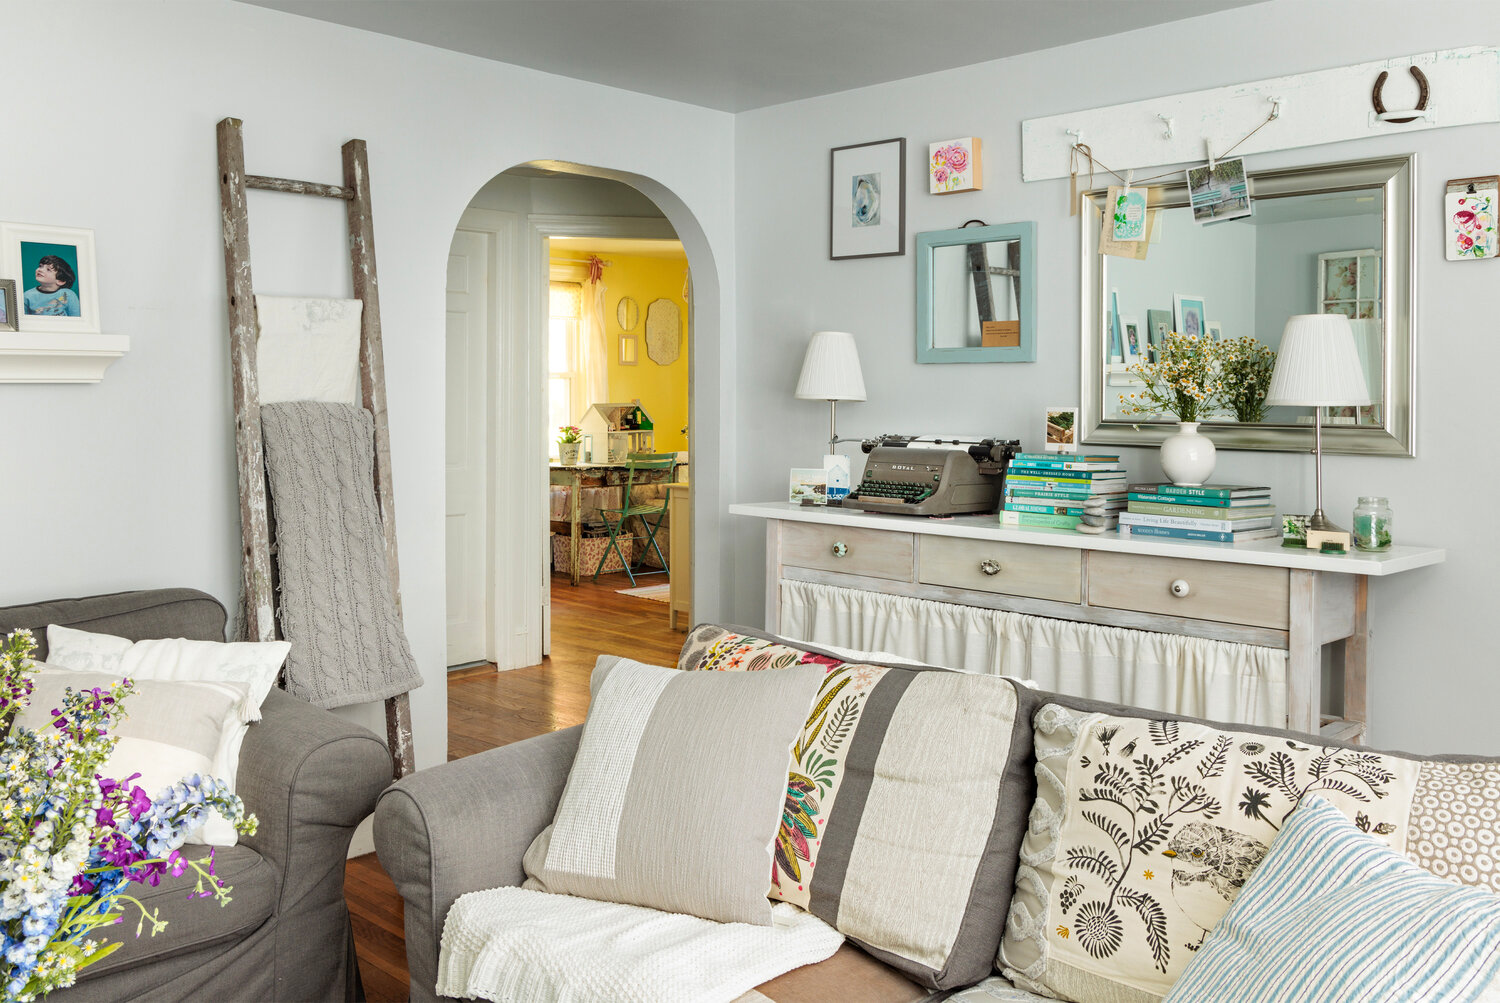 Walls are put to work with mirrors to enlarge the space, and a peg rack to hang favorite notes and cards. A ladder offers additional storage for throws and blankets